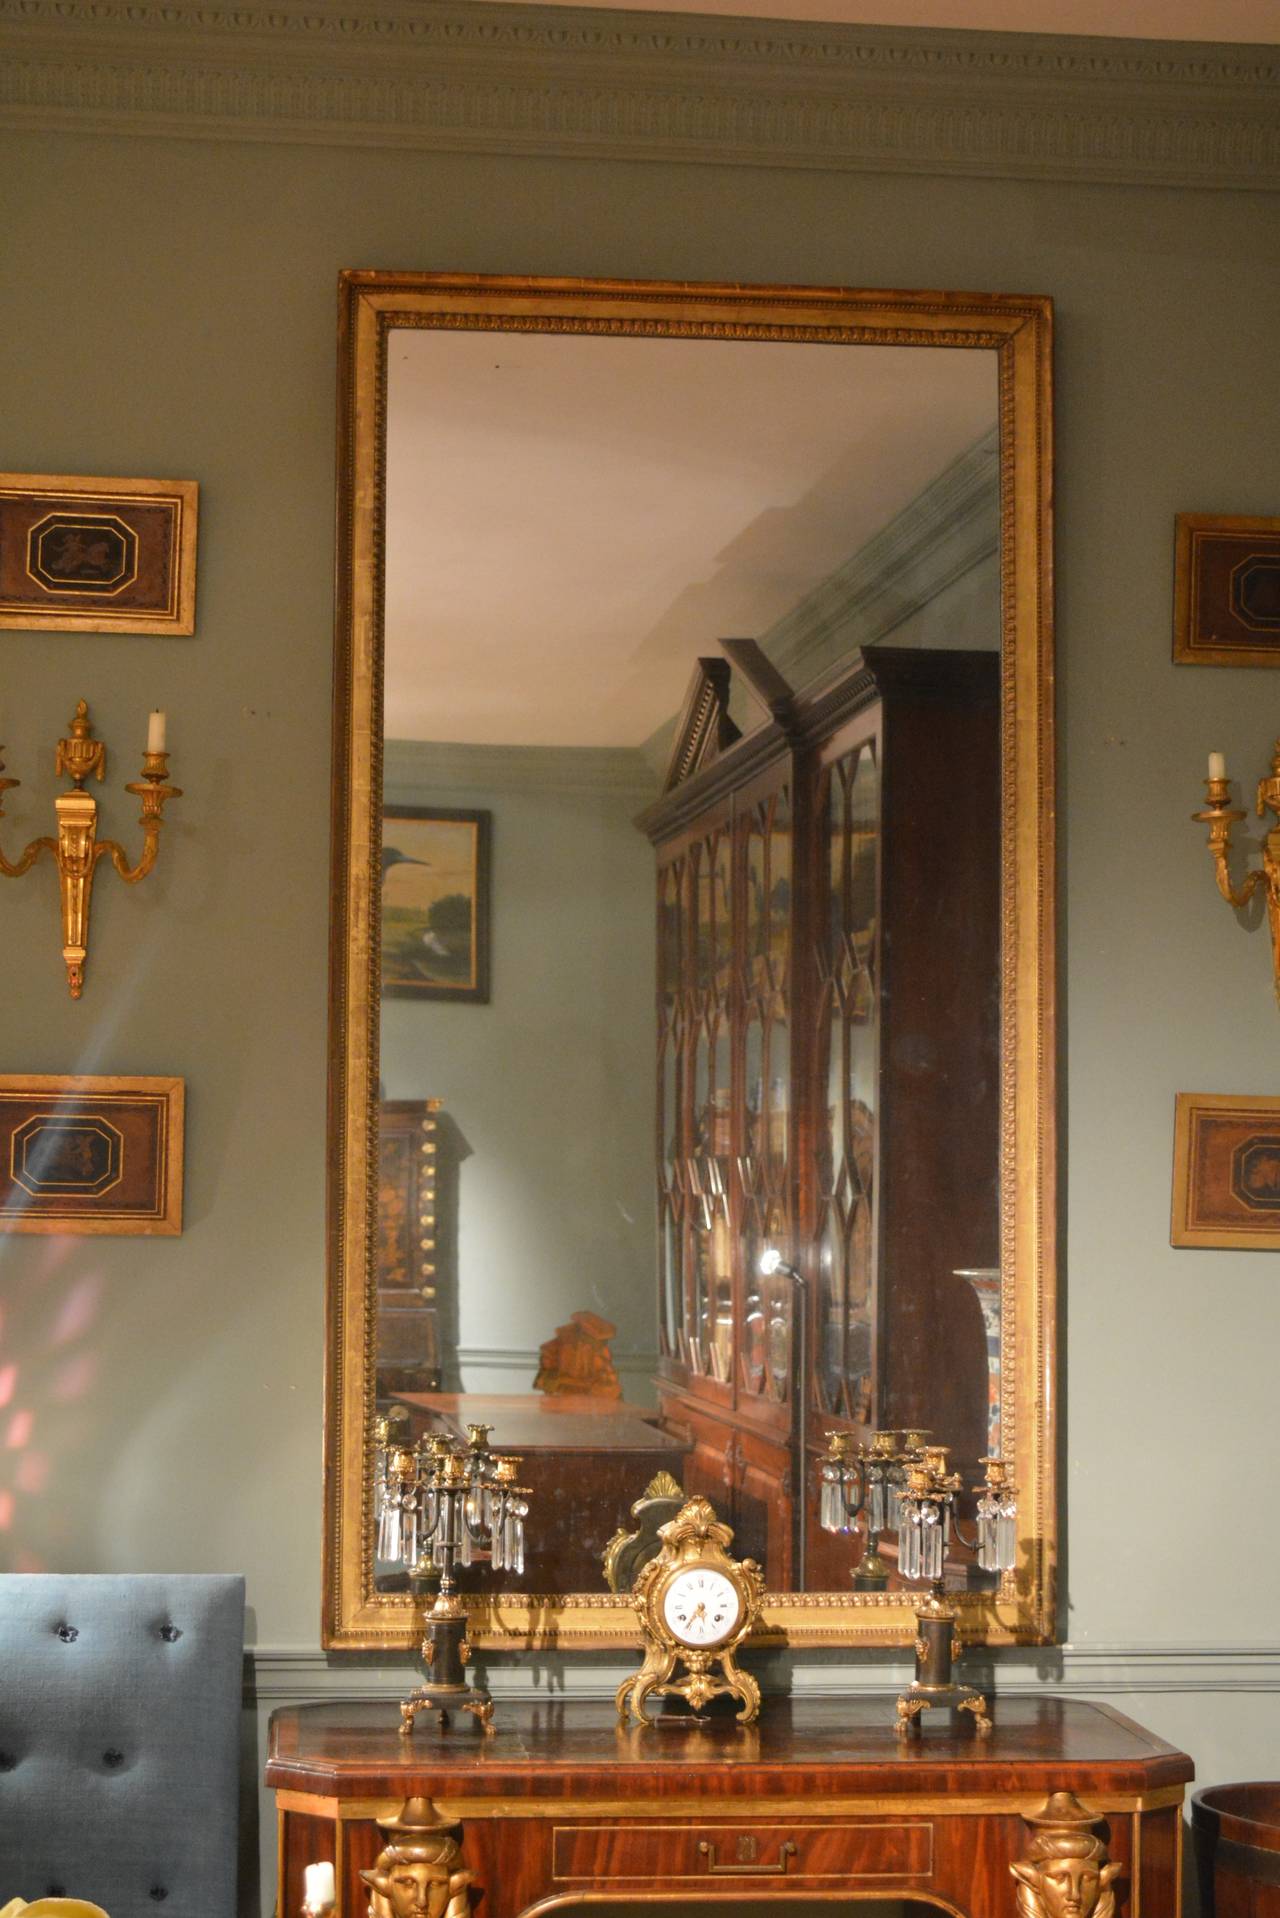 Large 18th Century English Neoclassical Wall Mirror In Excellent Condition For Sale In Salisbury Wiltshire, GB